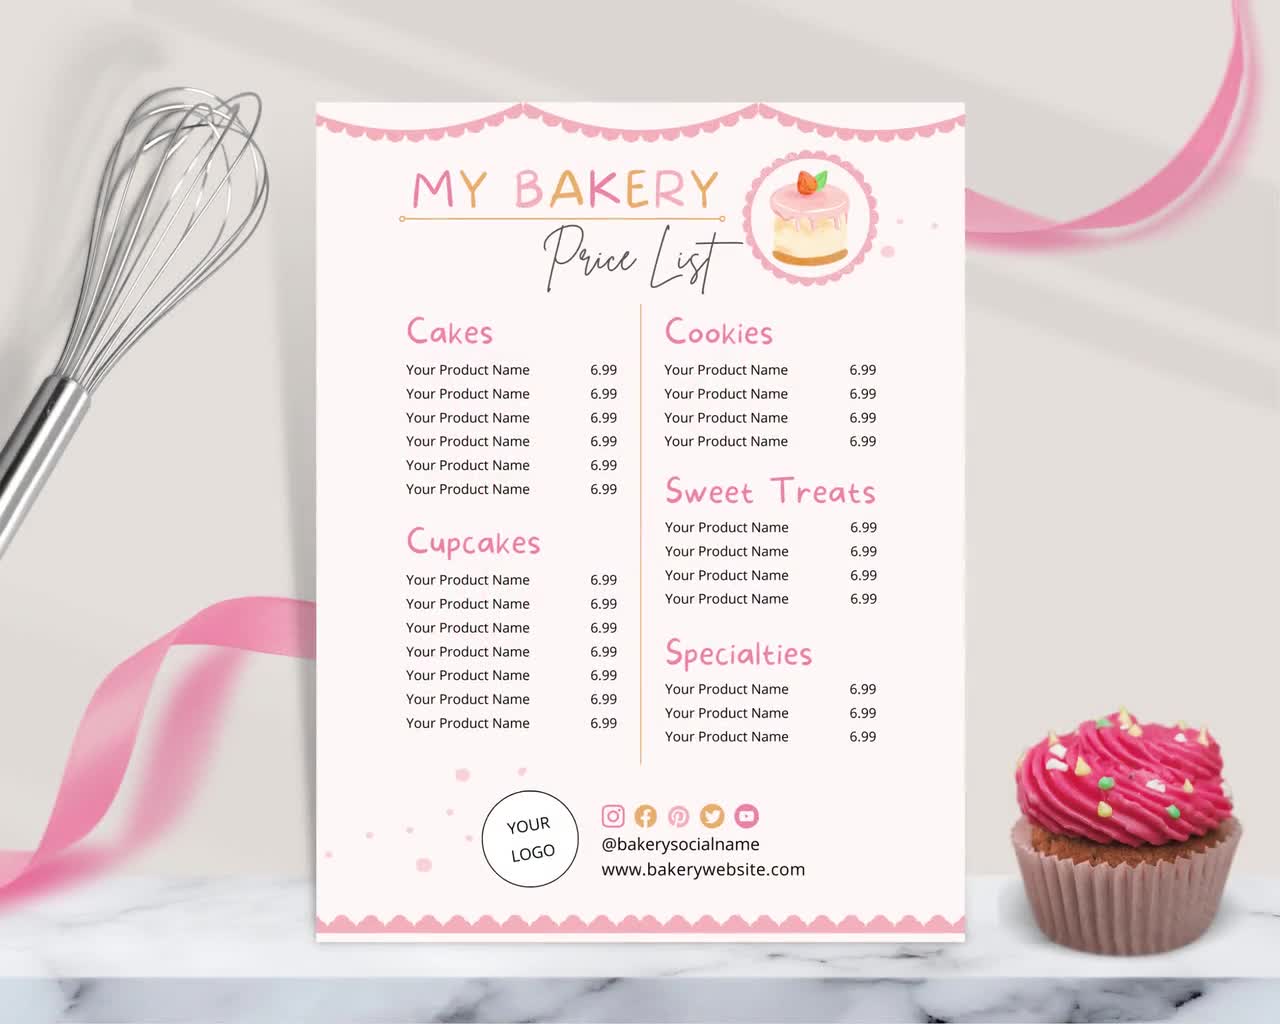 Cake Pop Price List Template, Editable Bakery Price List, Printable Bakery  Menu Template, Dessert Menu Template, Instant Download - Etsy